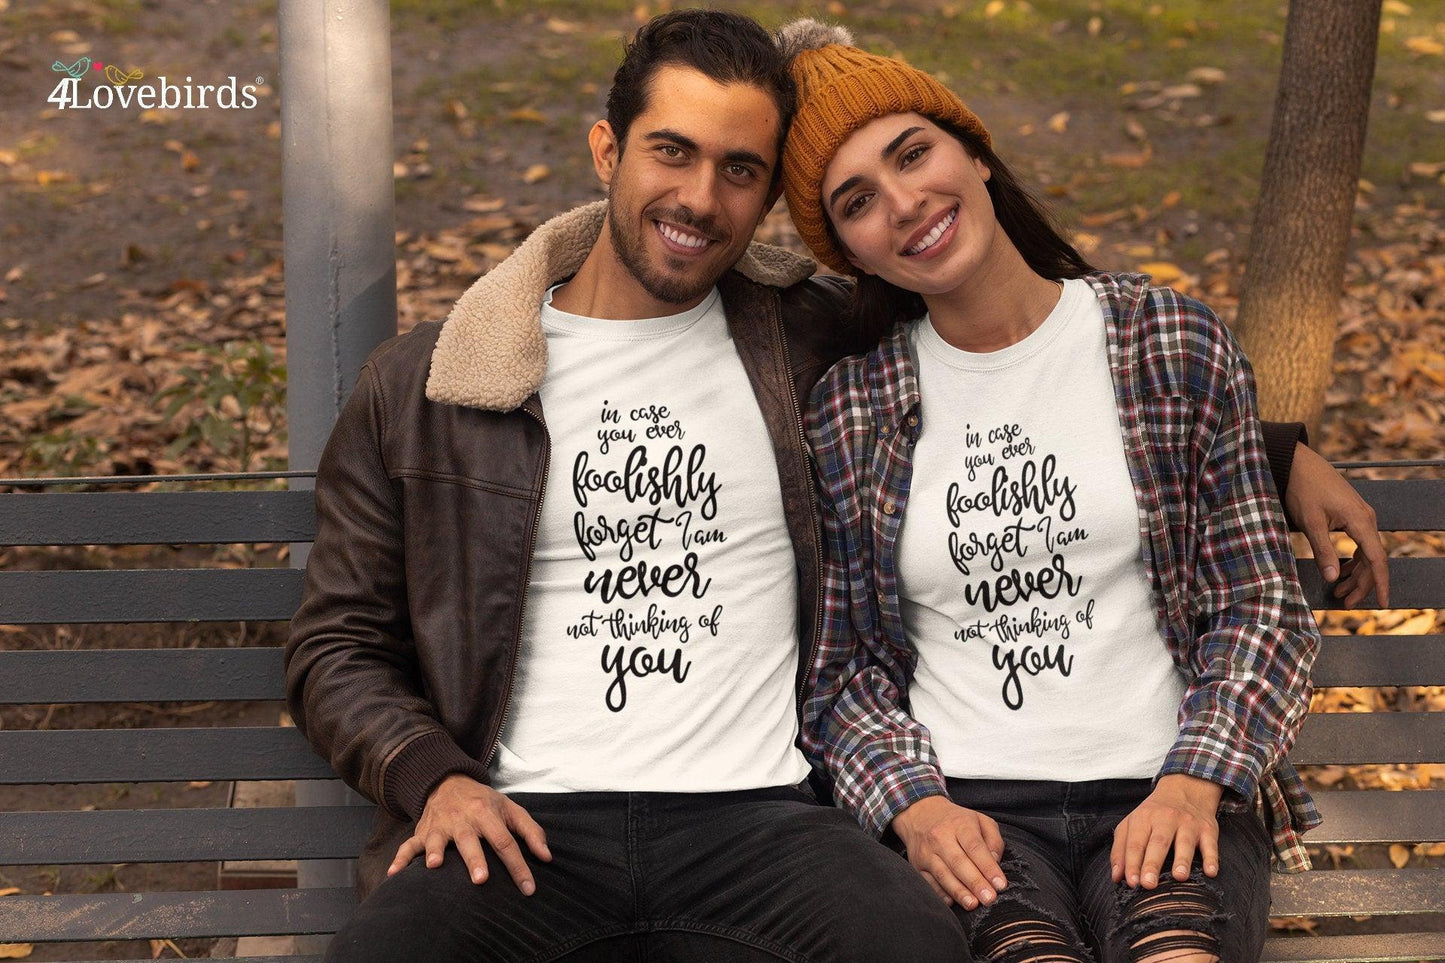 In case you ever foolishly forget I am never not thinking of you Hoodie, Lovers T-shirt, Gift for Couple, Valentine Sweatshirt, Cute Tshirt - 4Lovebirds